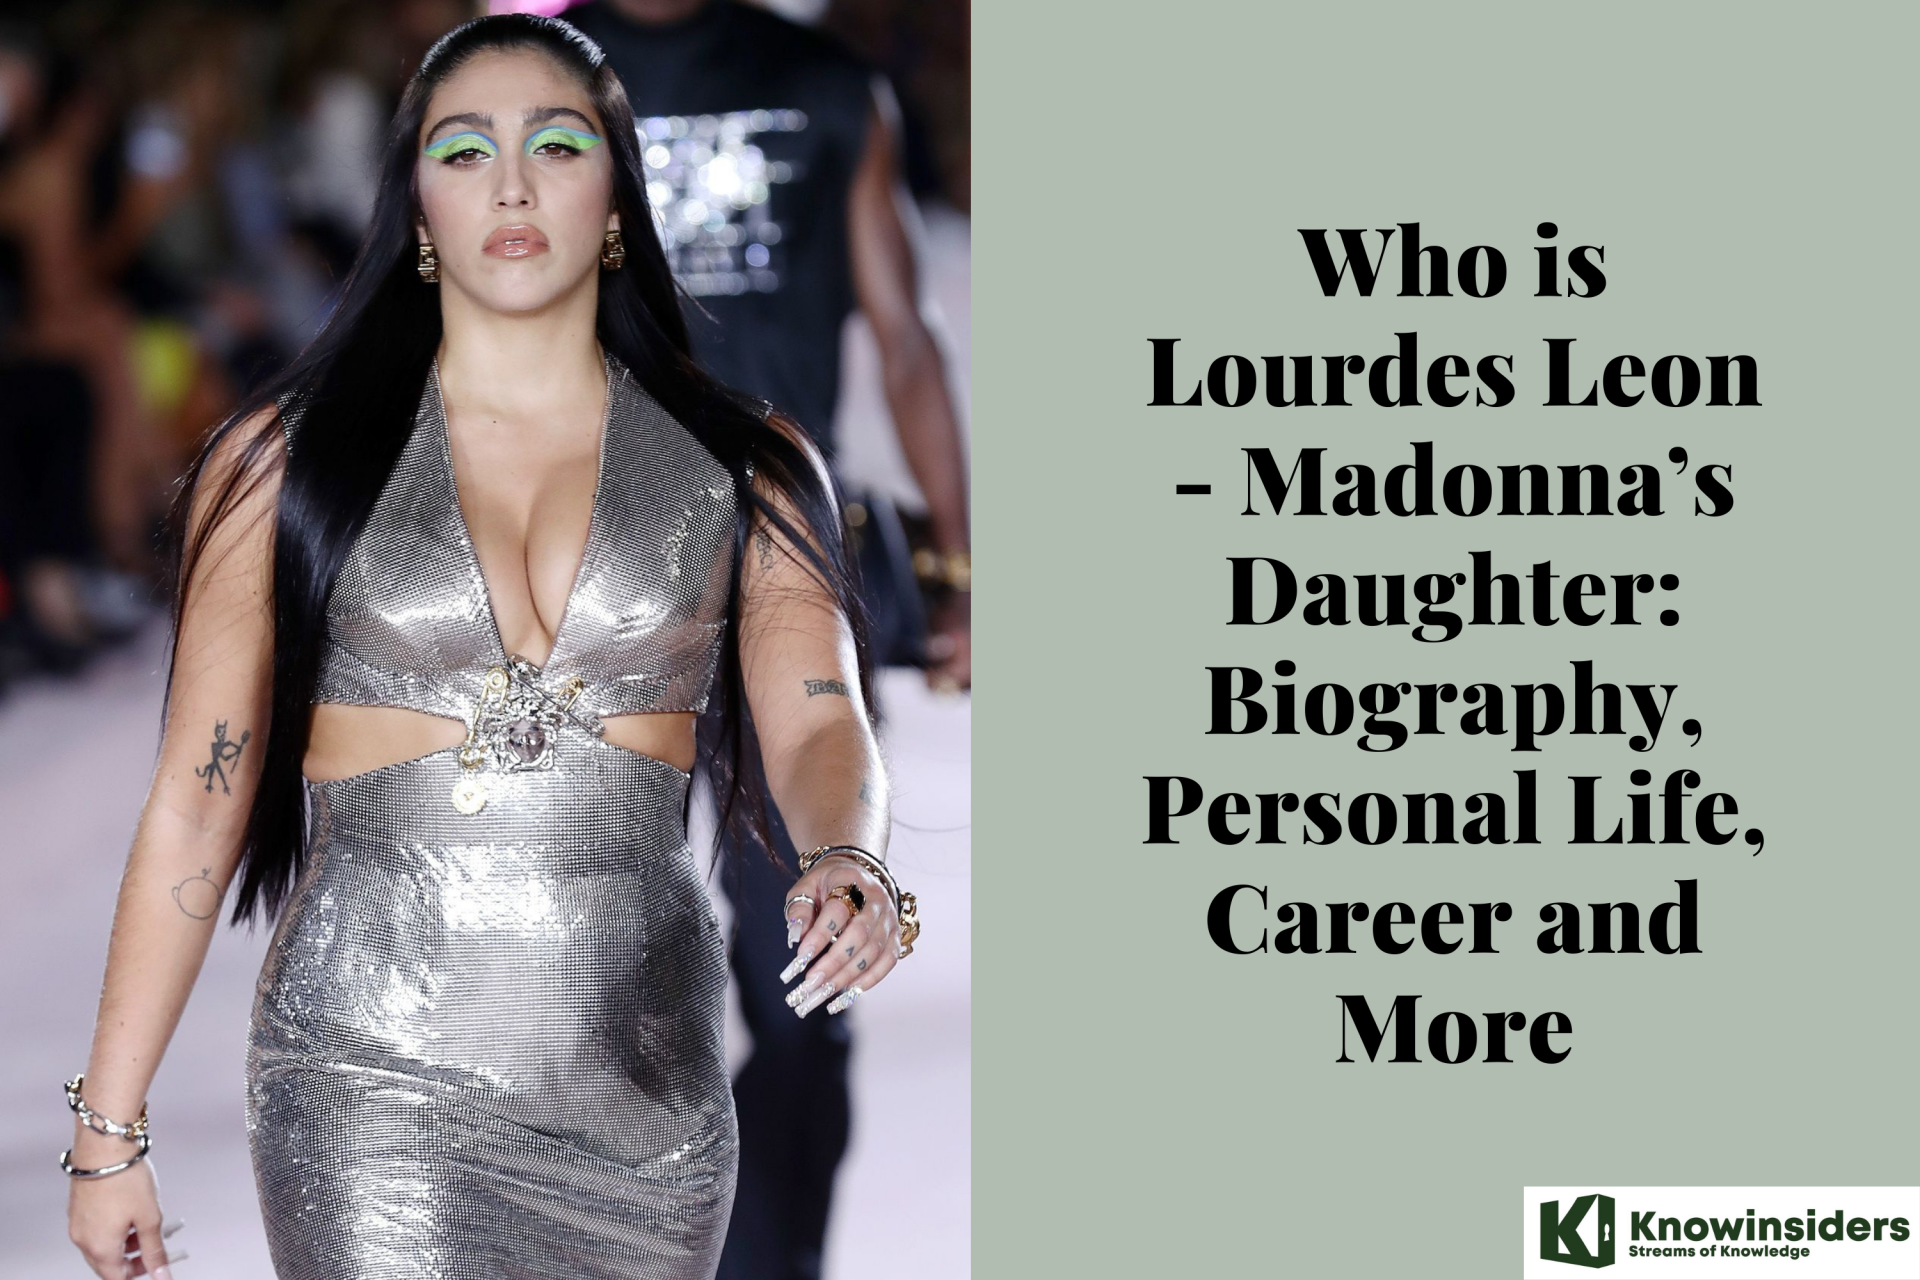 Who is Lourdes Leon - Madonna’s Daughter: Biography, Personal Life, Career and More